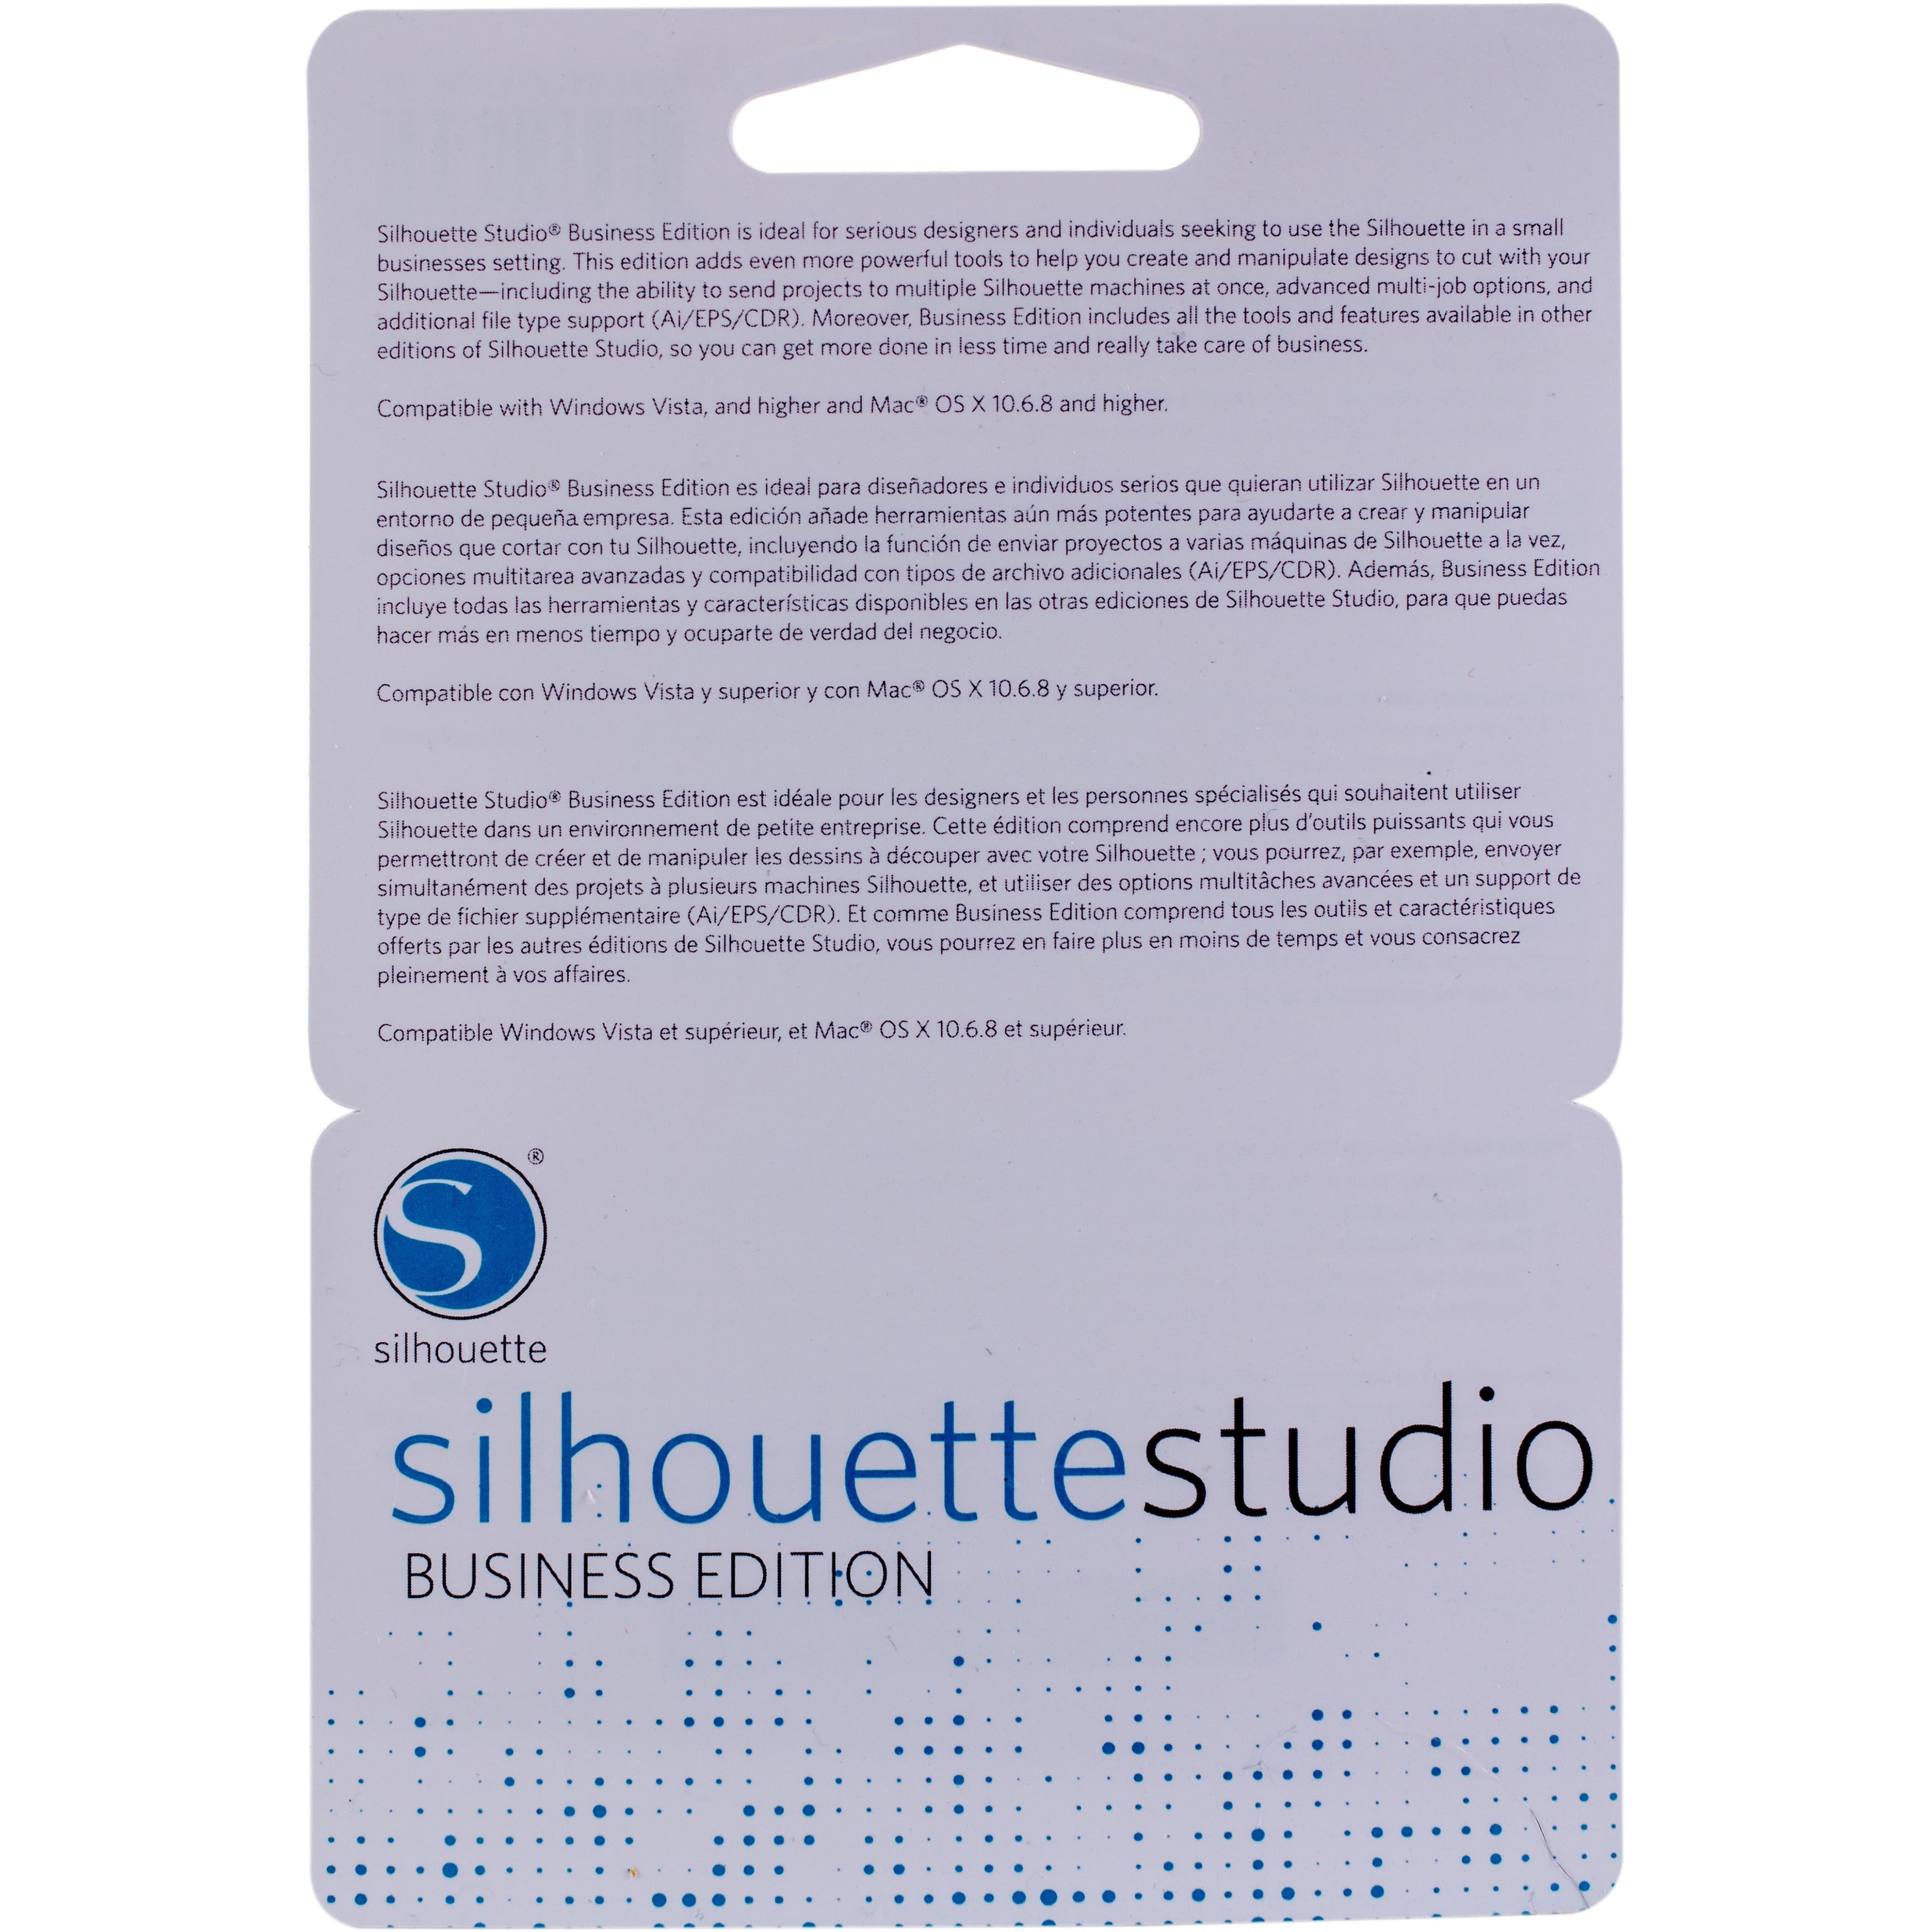 hoe many licenses come with silhouette studio business edition